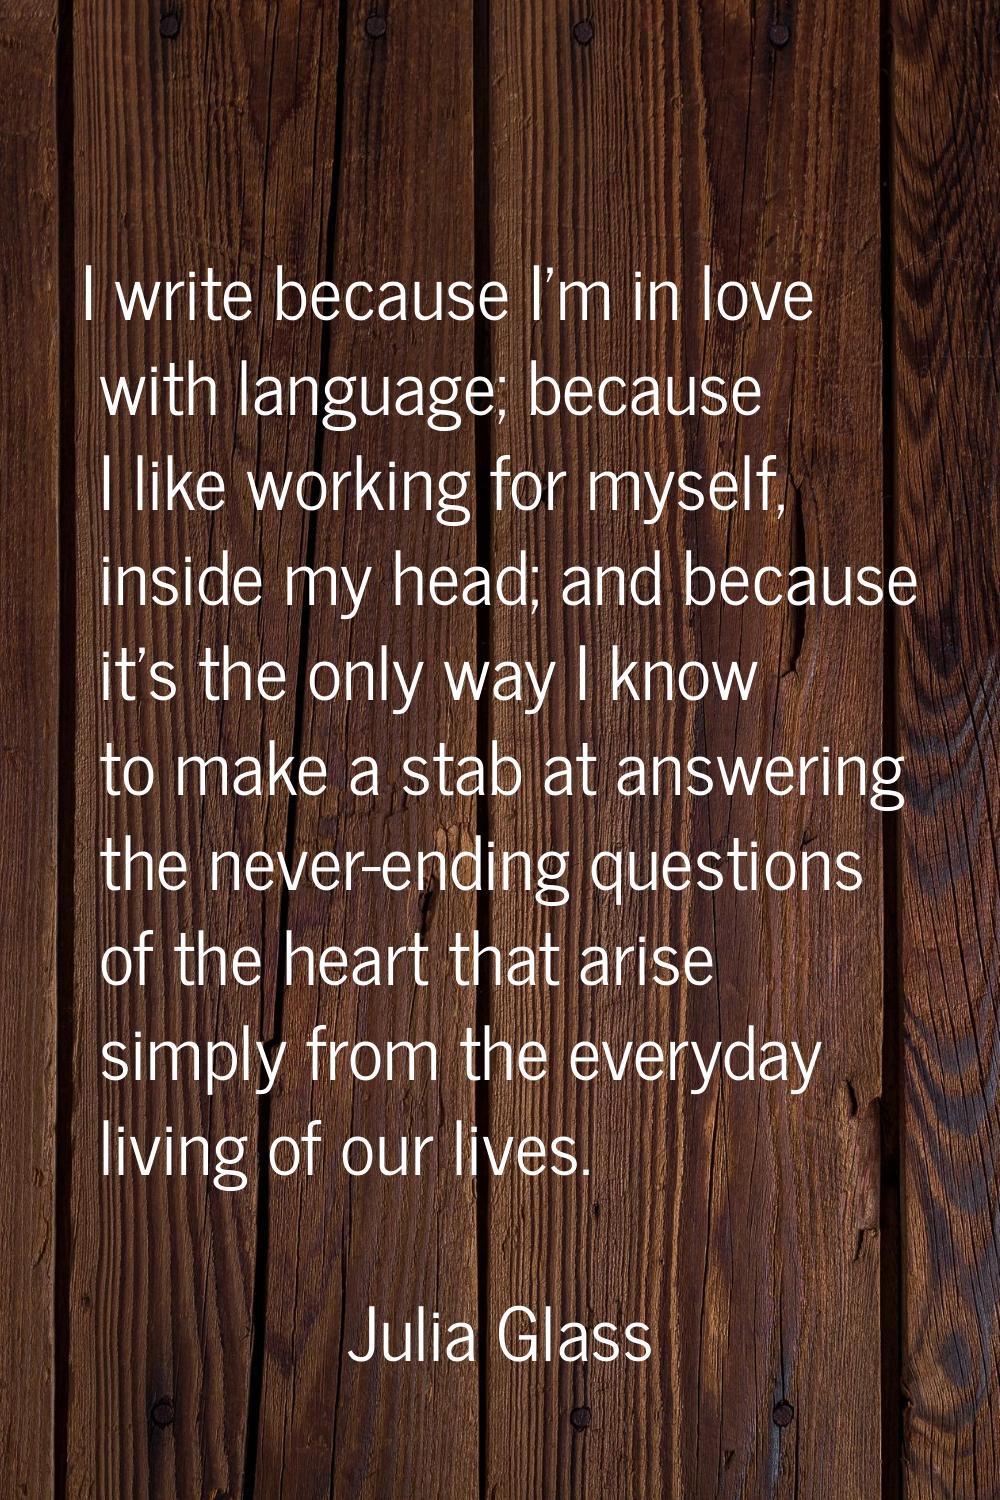 I write because I'm in love with language; because I like working for myself, inside my head; and b